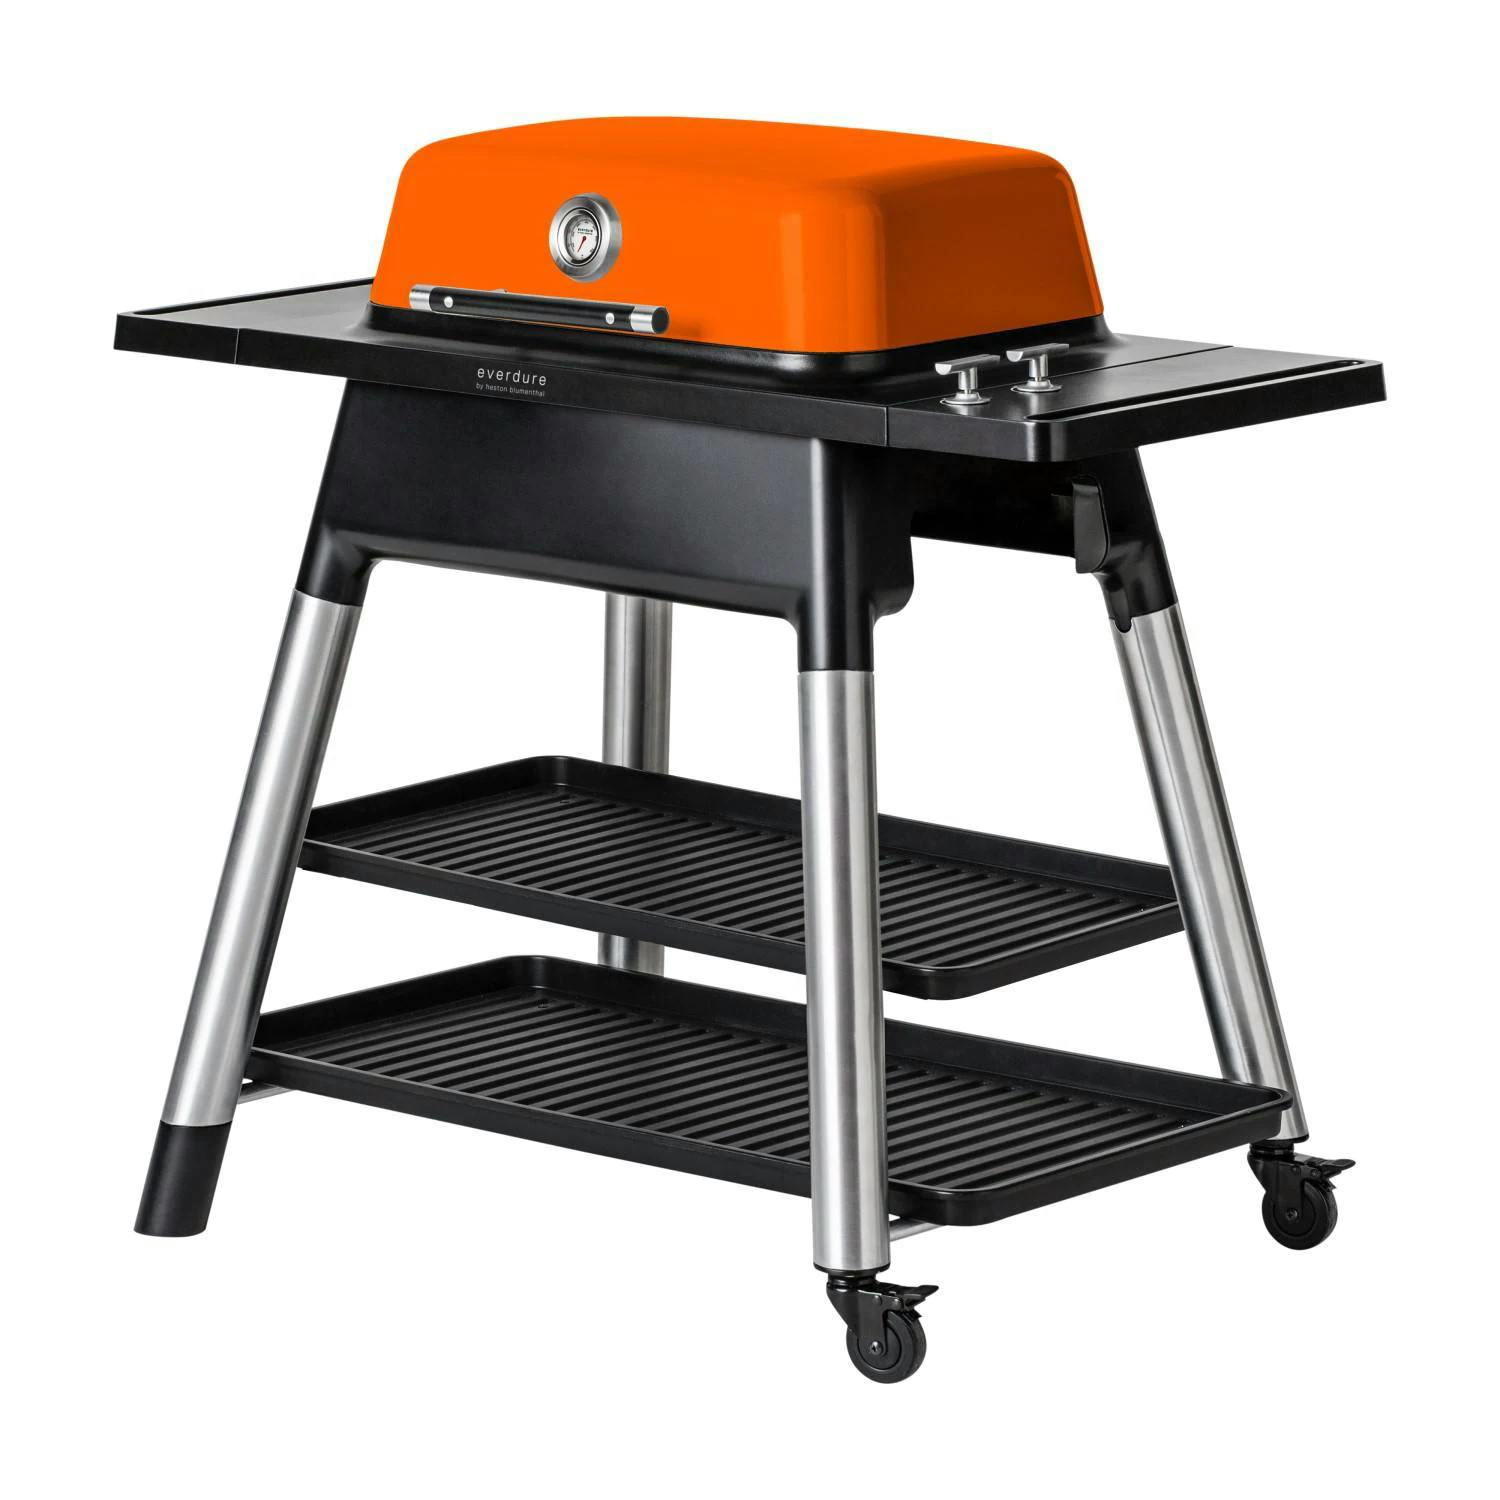 Everdure by Heston Blumenthal Force 2-Burner Gas Grill with Stand · 48 in. · Propane